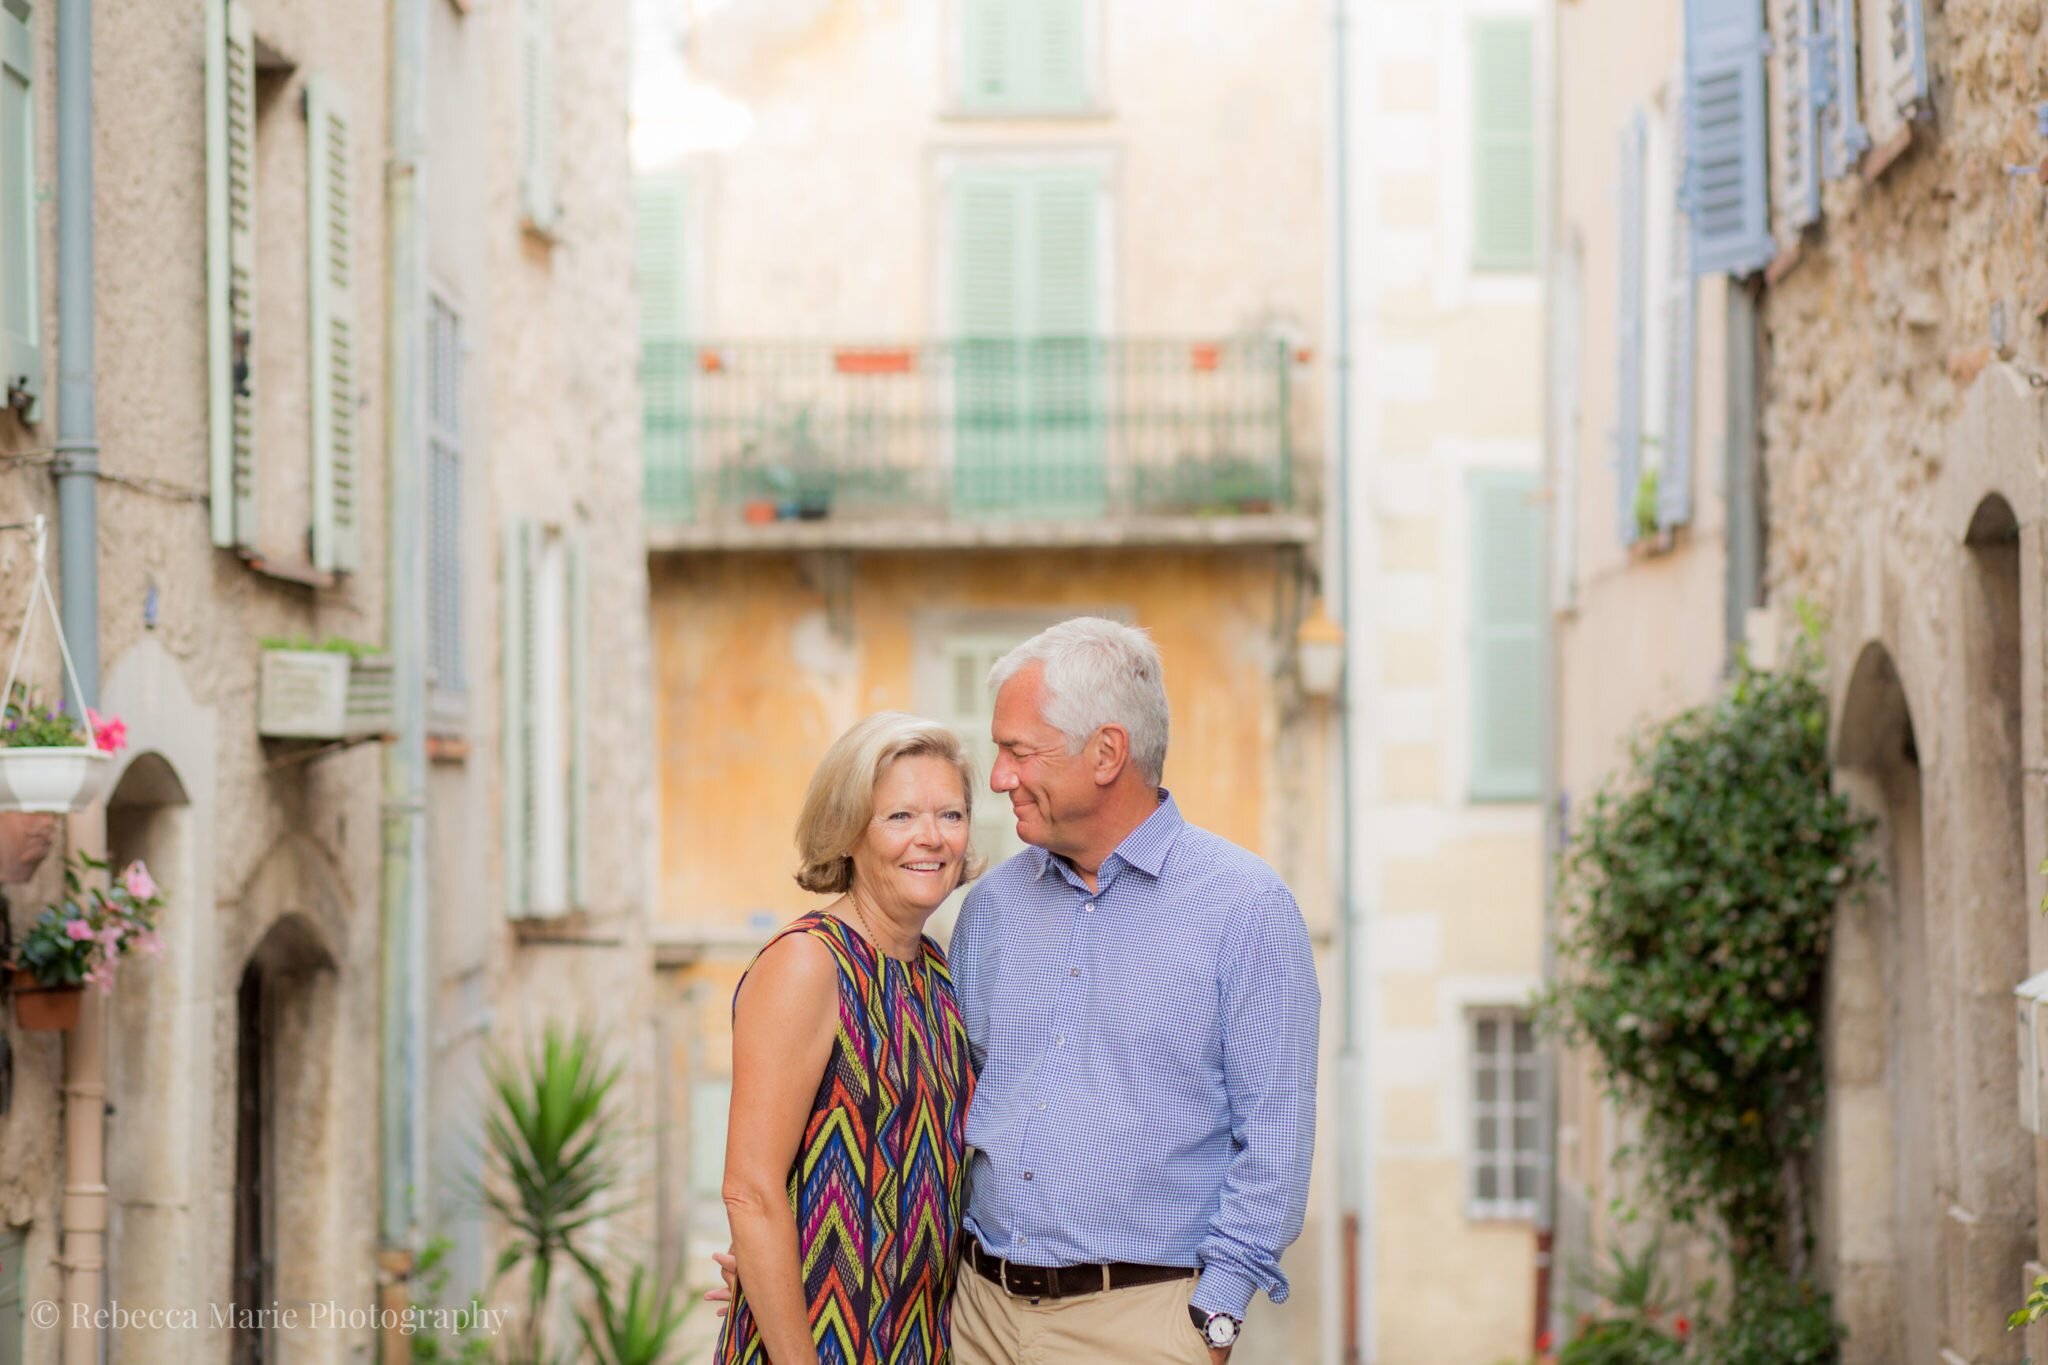 Portraits-in-France-Valbonne-Rebecca-Marie-Photography-8-1